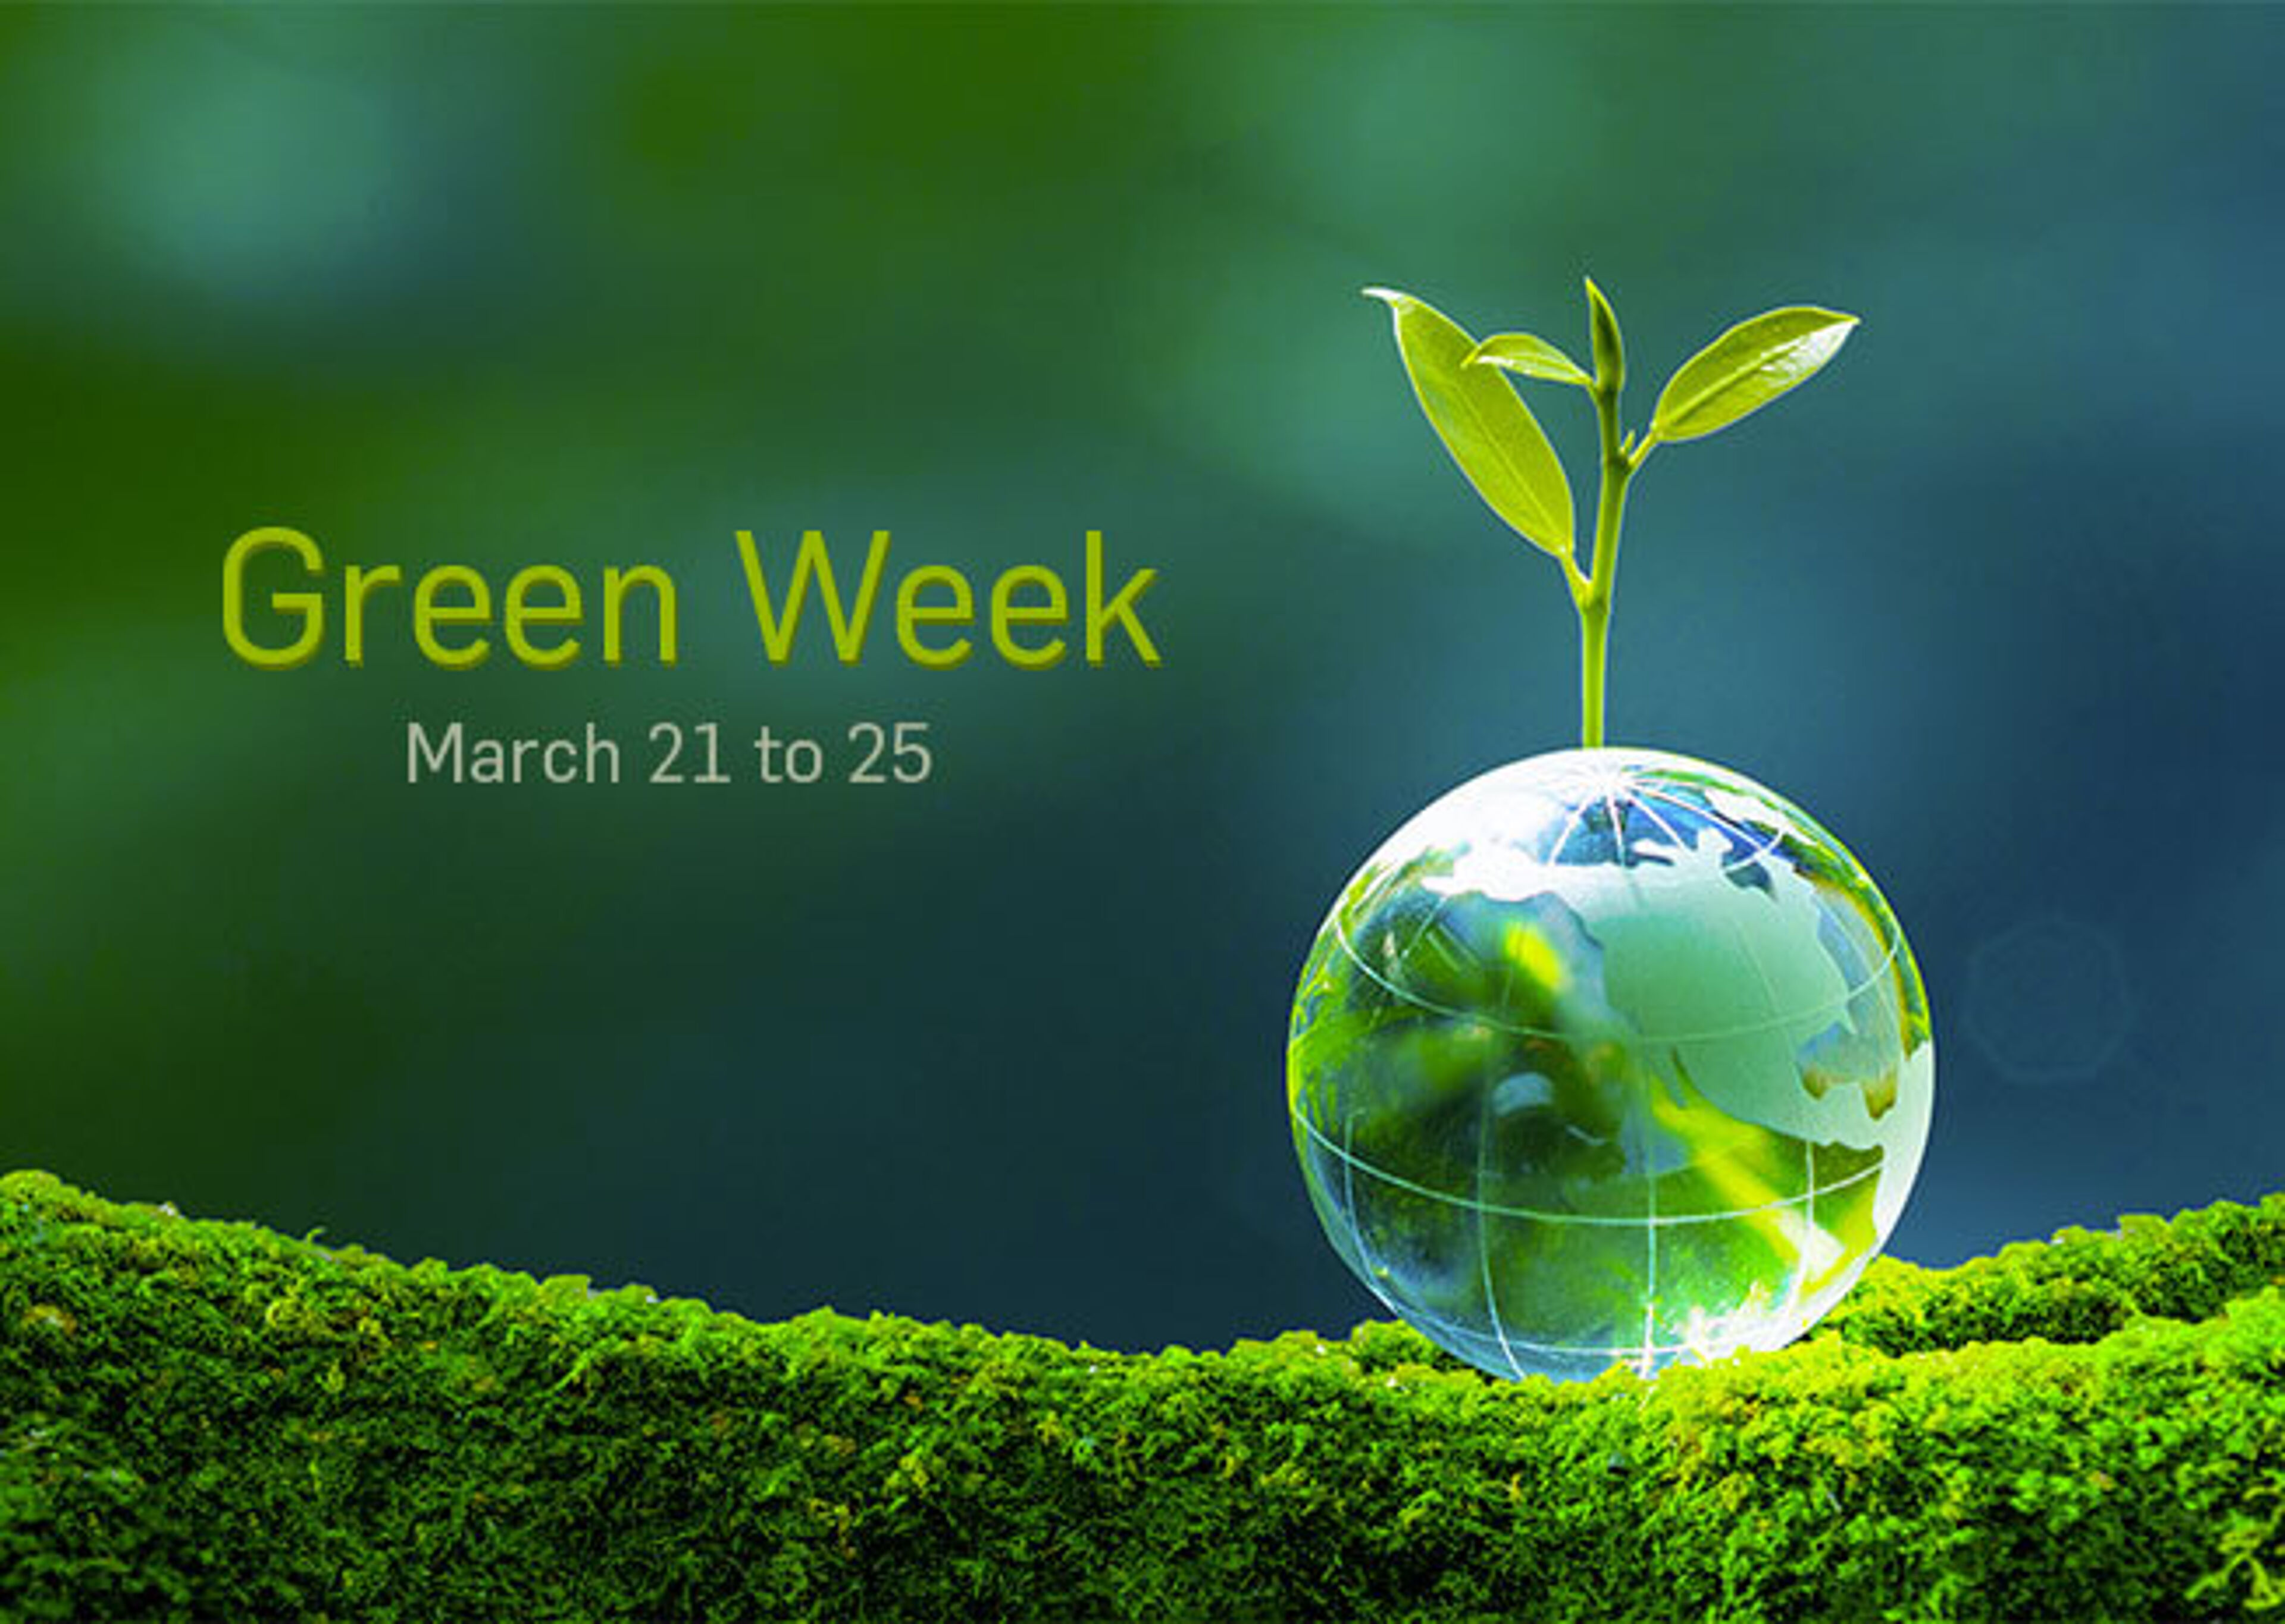 A young plant sprouts from a transparent globe on a mossy surface, symbolizing sustainability for Green Week, March 21 to 25.